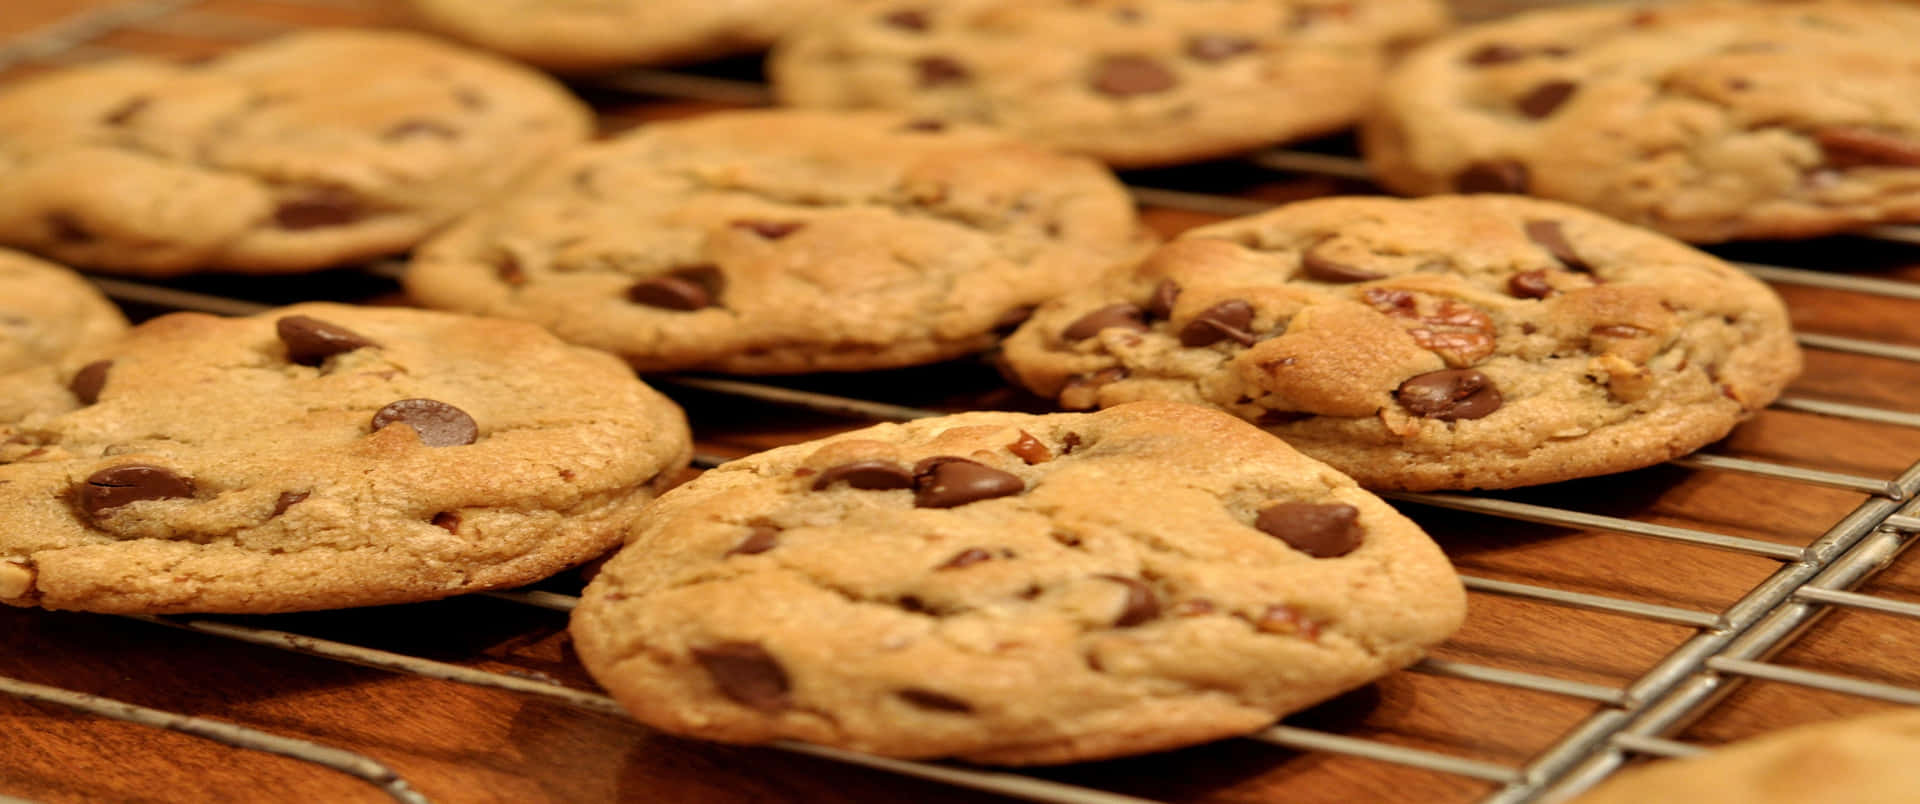 3440x1440p Cookies Background 3440 X 1440 Background